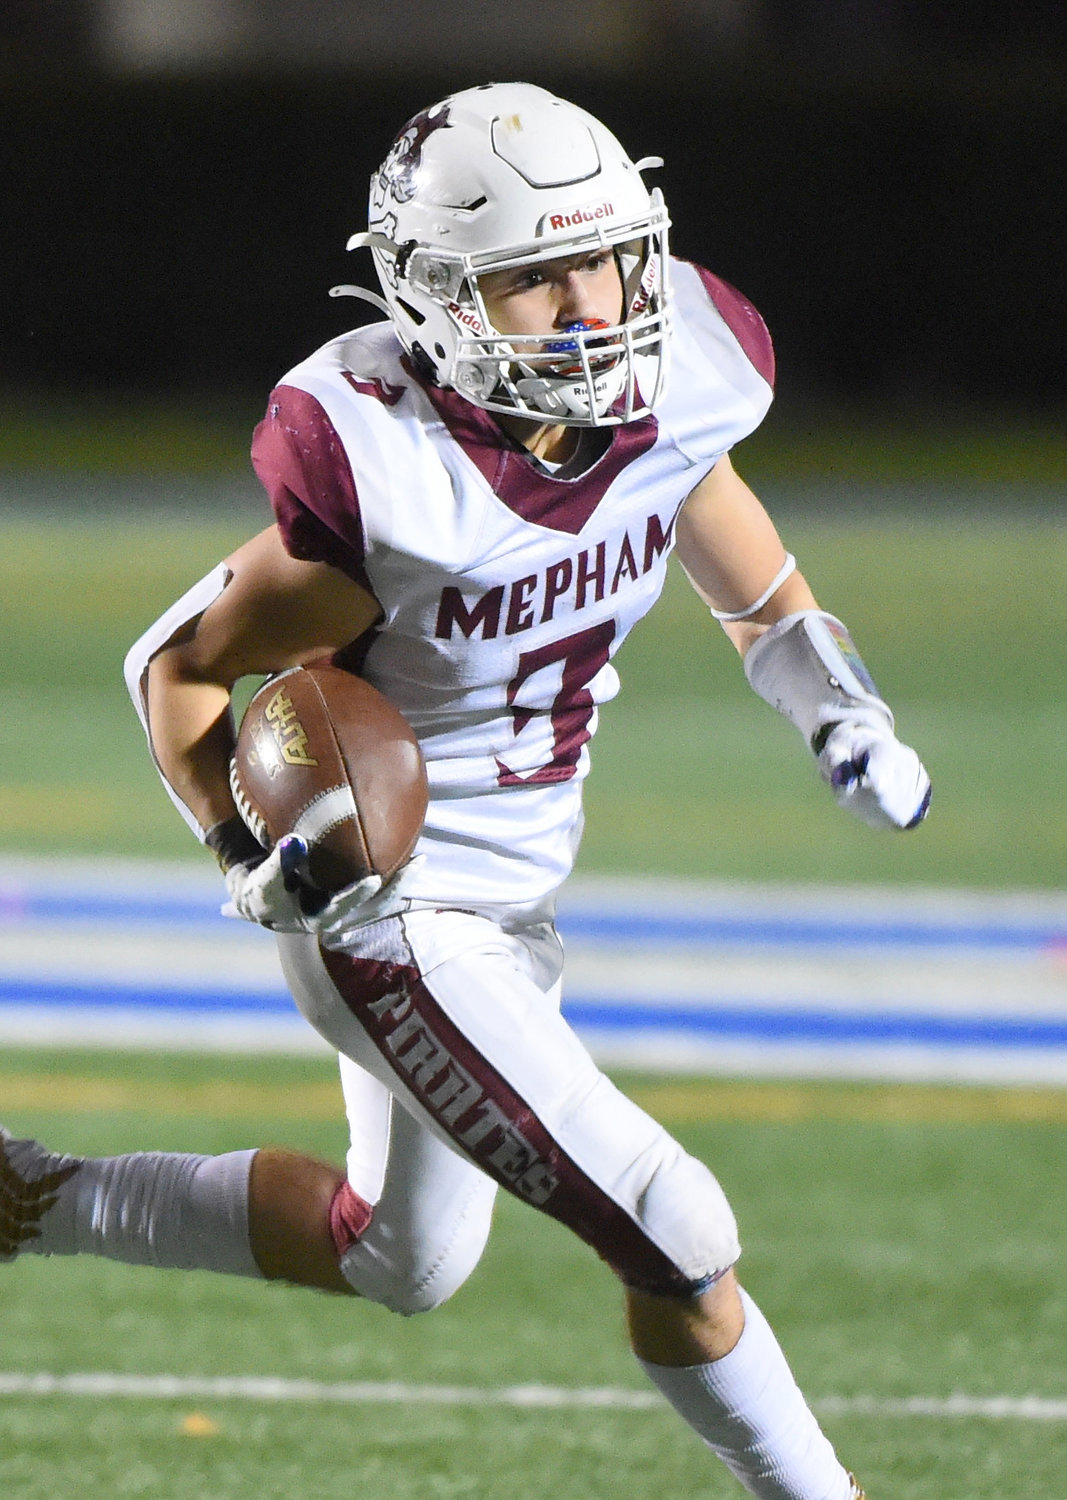 Junior Dylan Dunn had a rushing touchdown in the second quarter of Mepham's semifinal playoff defeat to MacArthur last Saturday night.